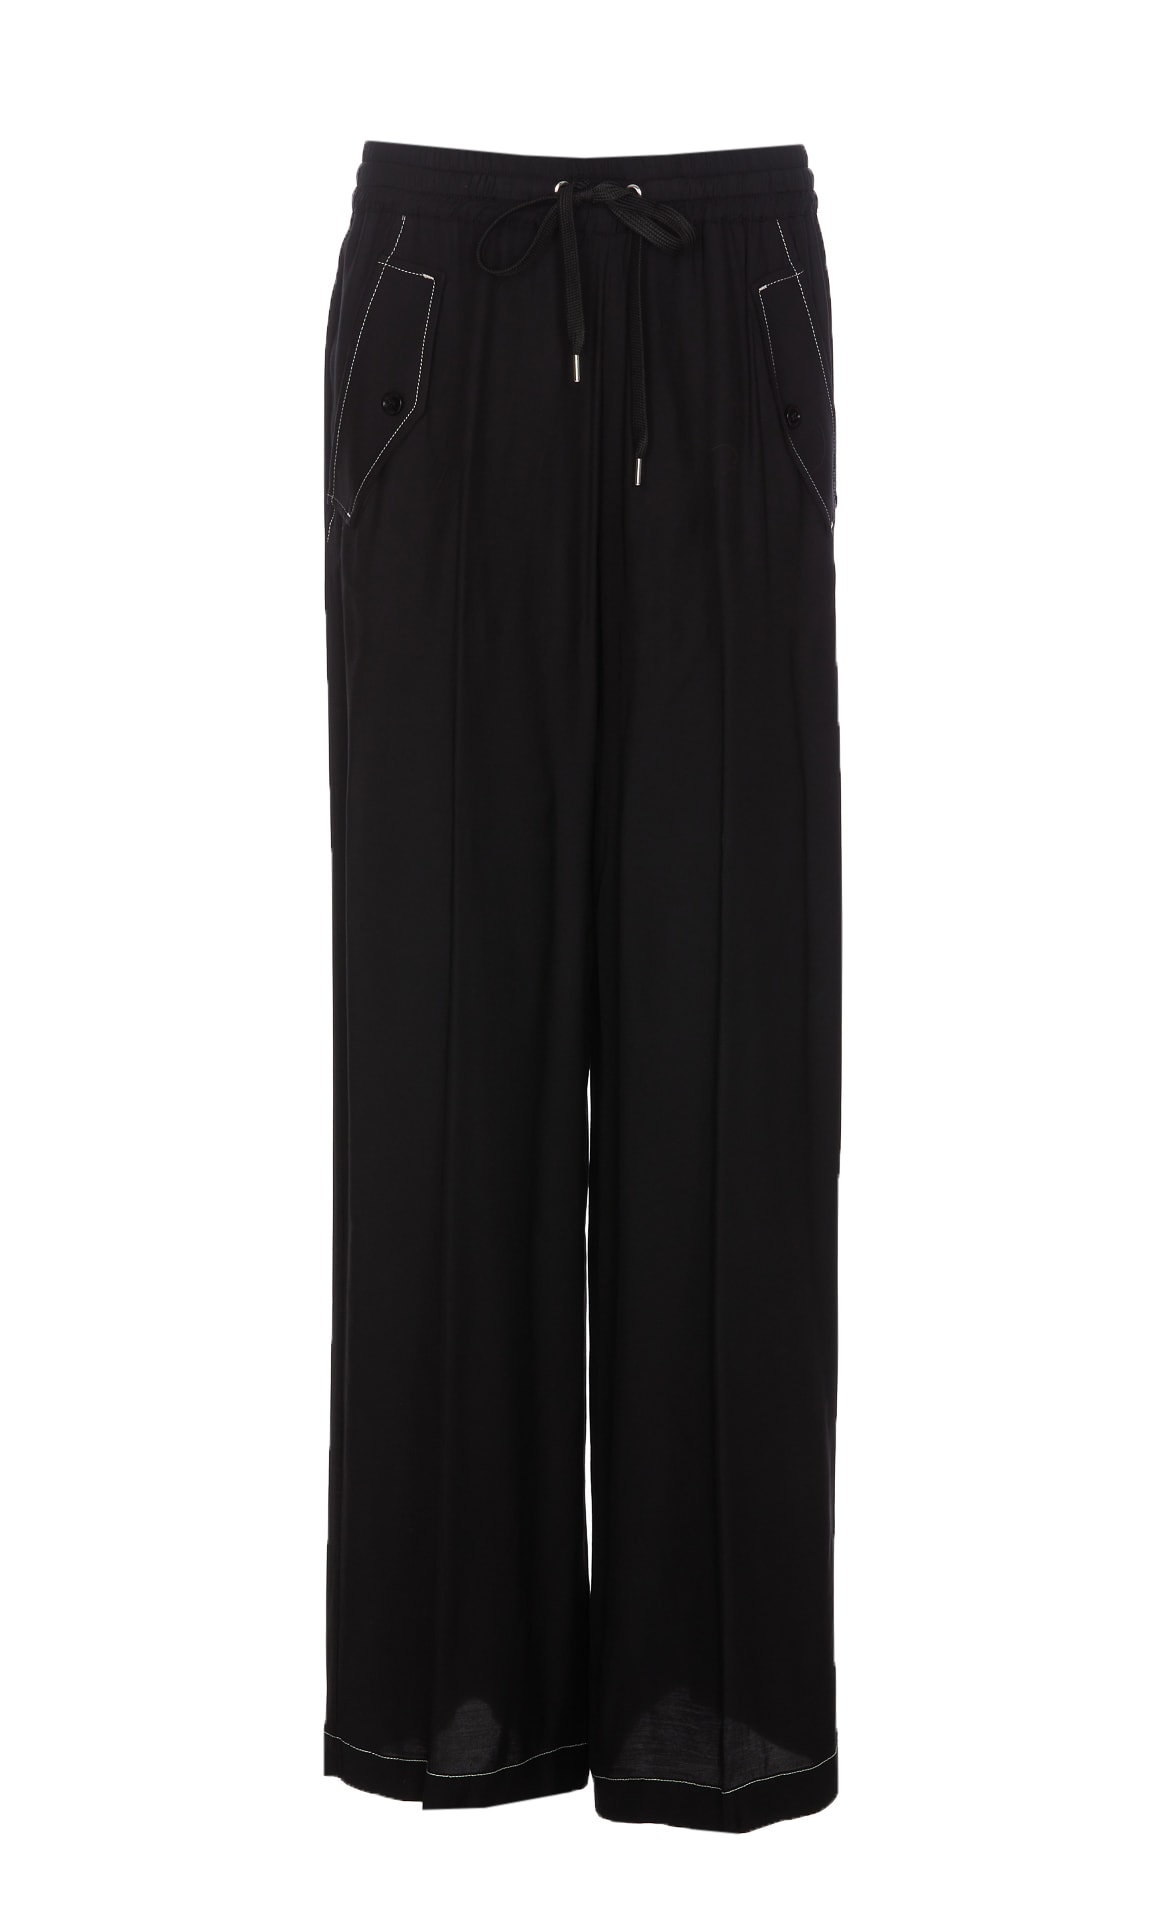 Wide Twill Trousers